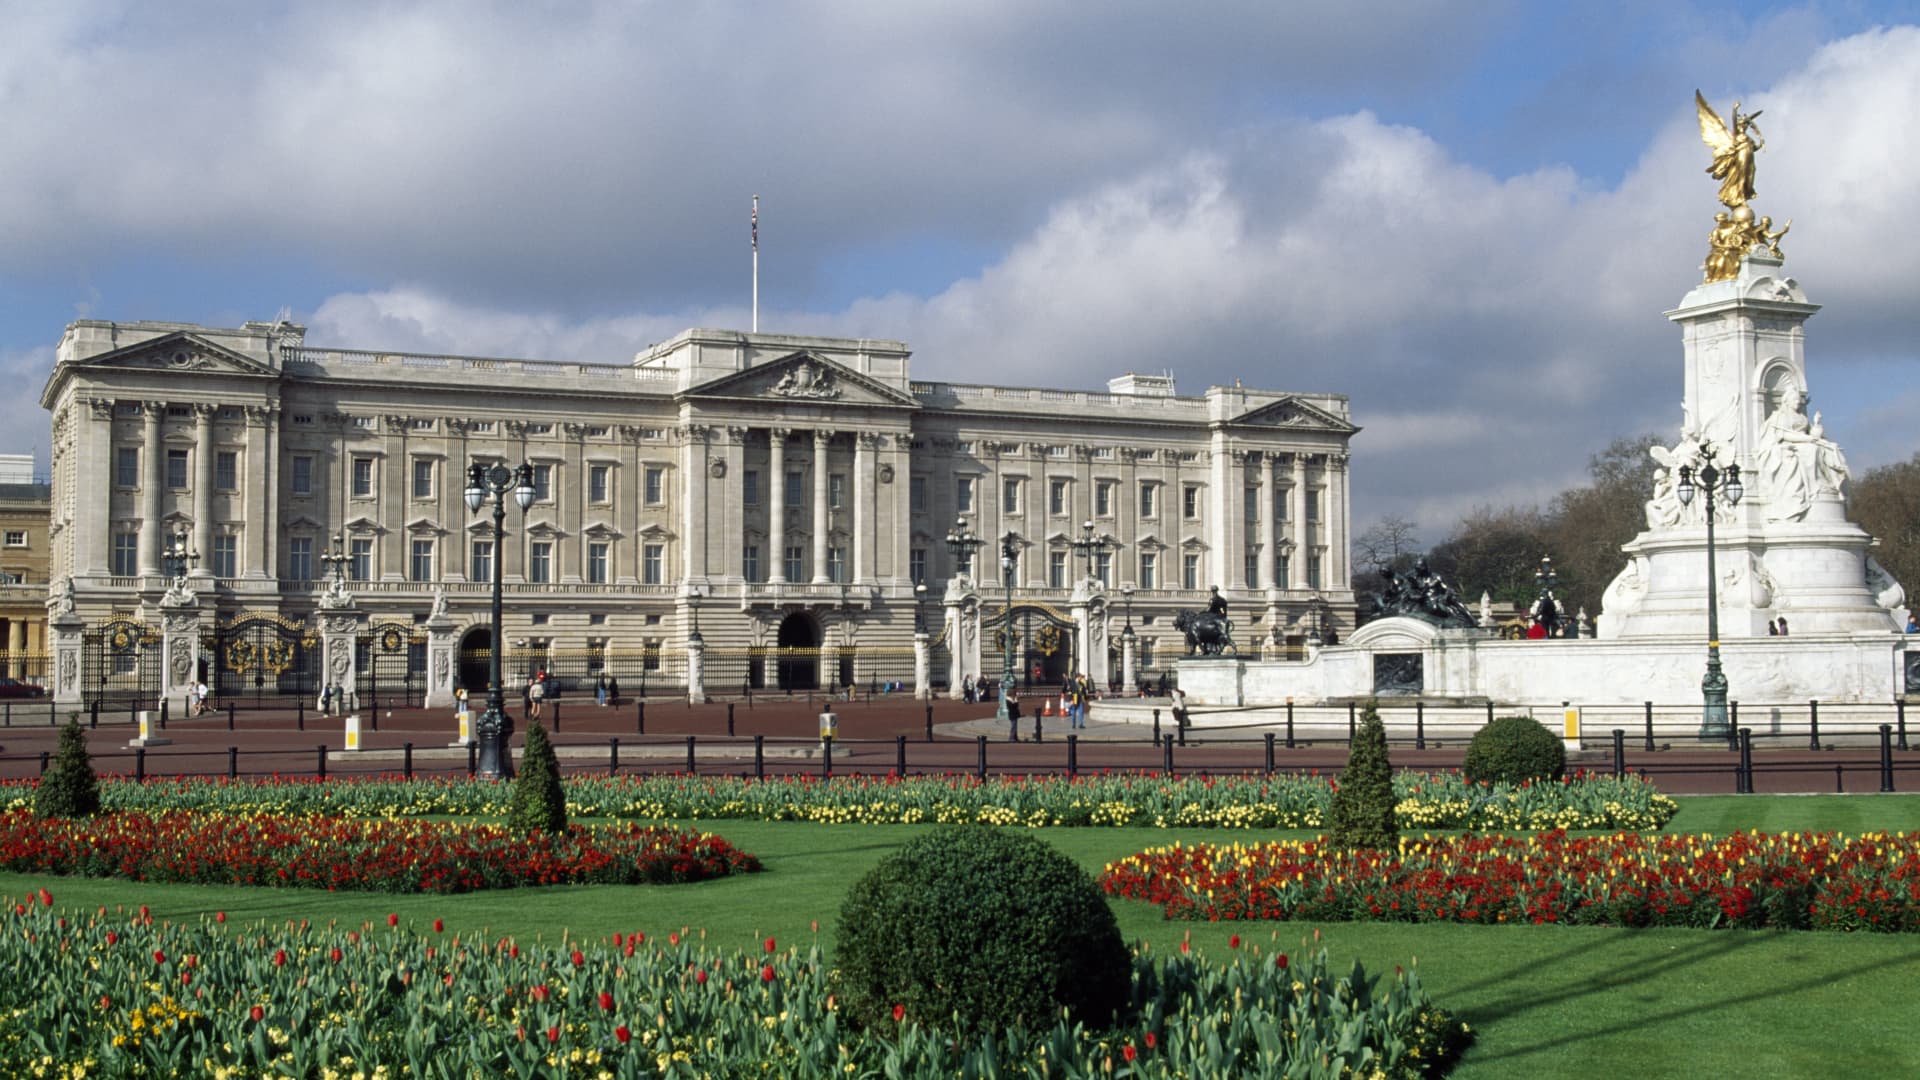 Buckingham Palace, London residence of the reigning monarch of the United Kingdom, is open for tours outside of the coronation weekend.